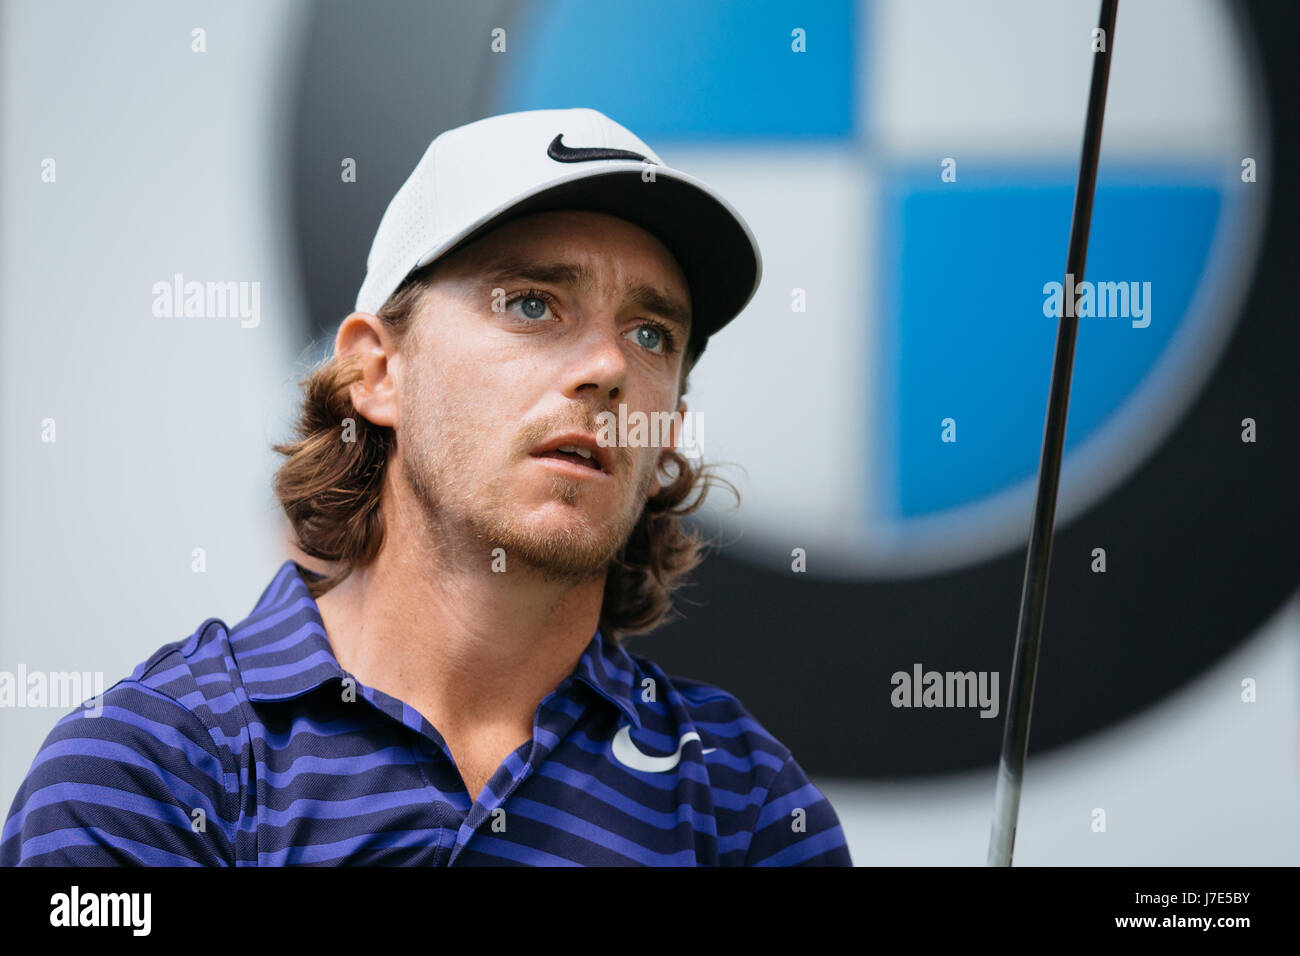 Tommy Fleetwood competes in the Pro-Am competition ahead of the BMW PGA Championship at Wentworth on May, 24, 2017. Stock Photo